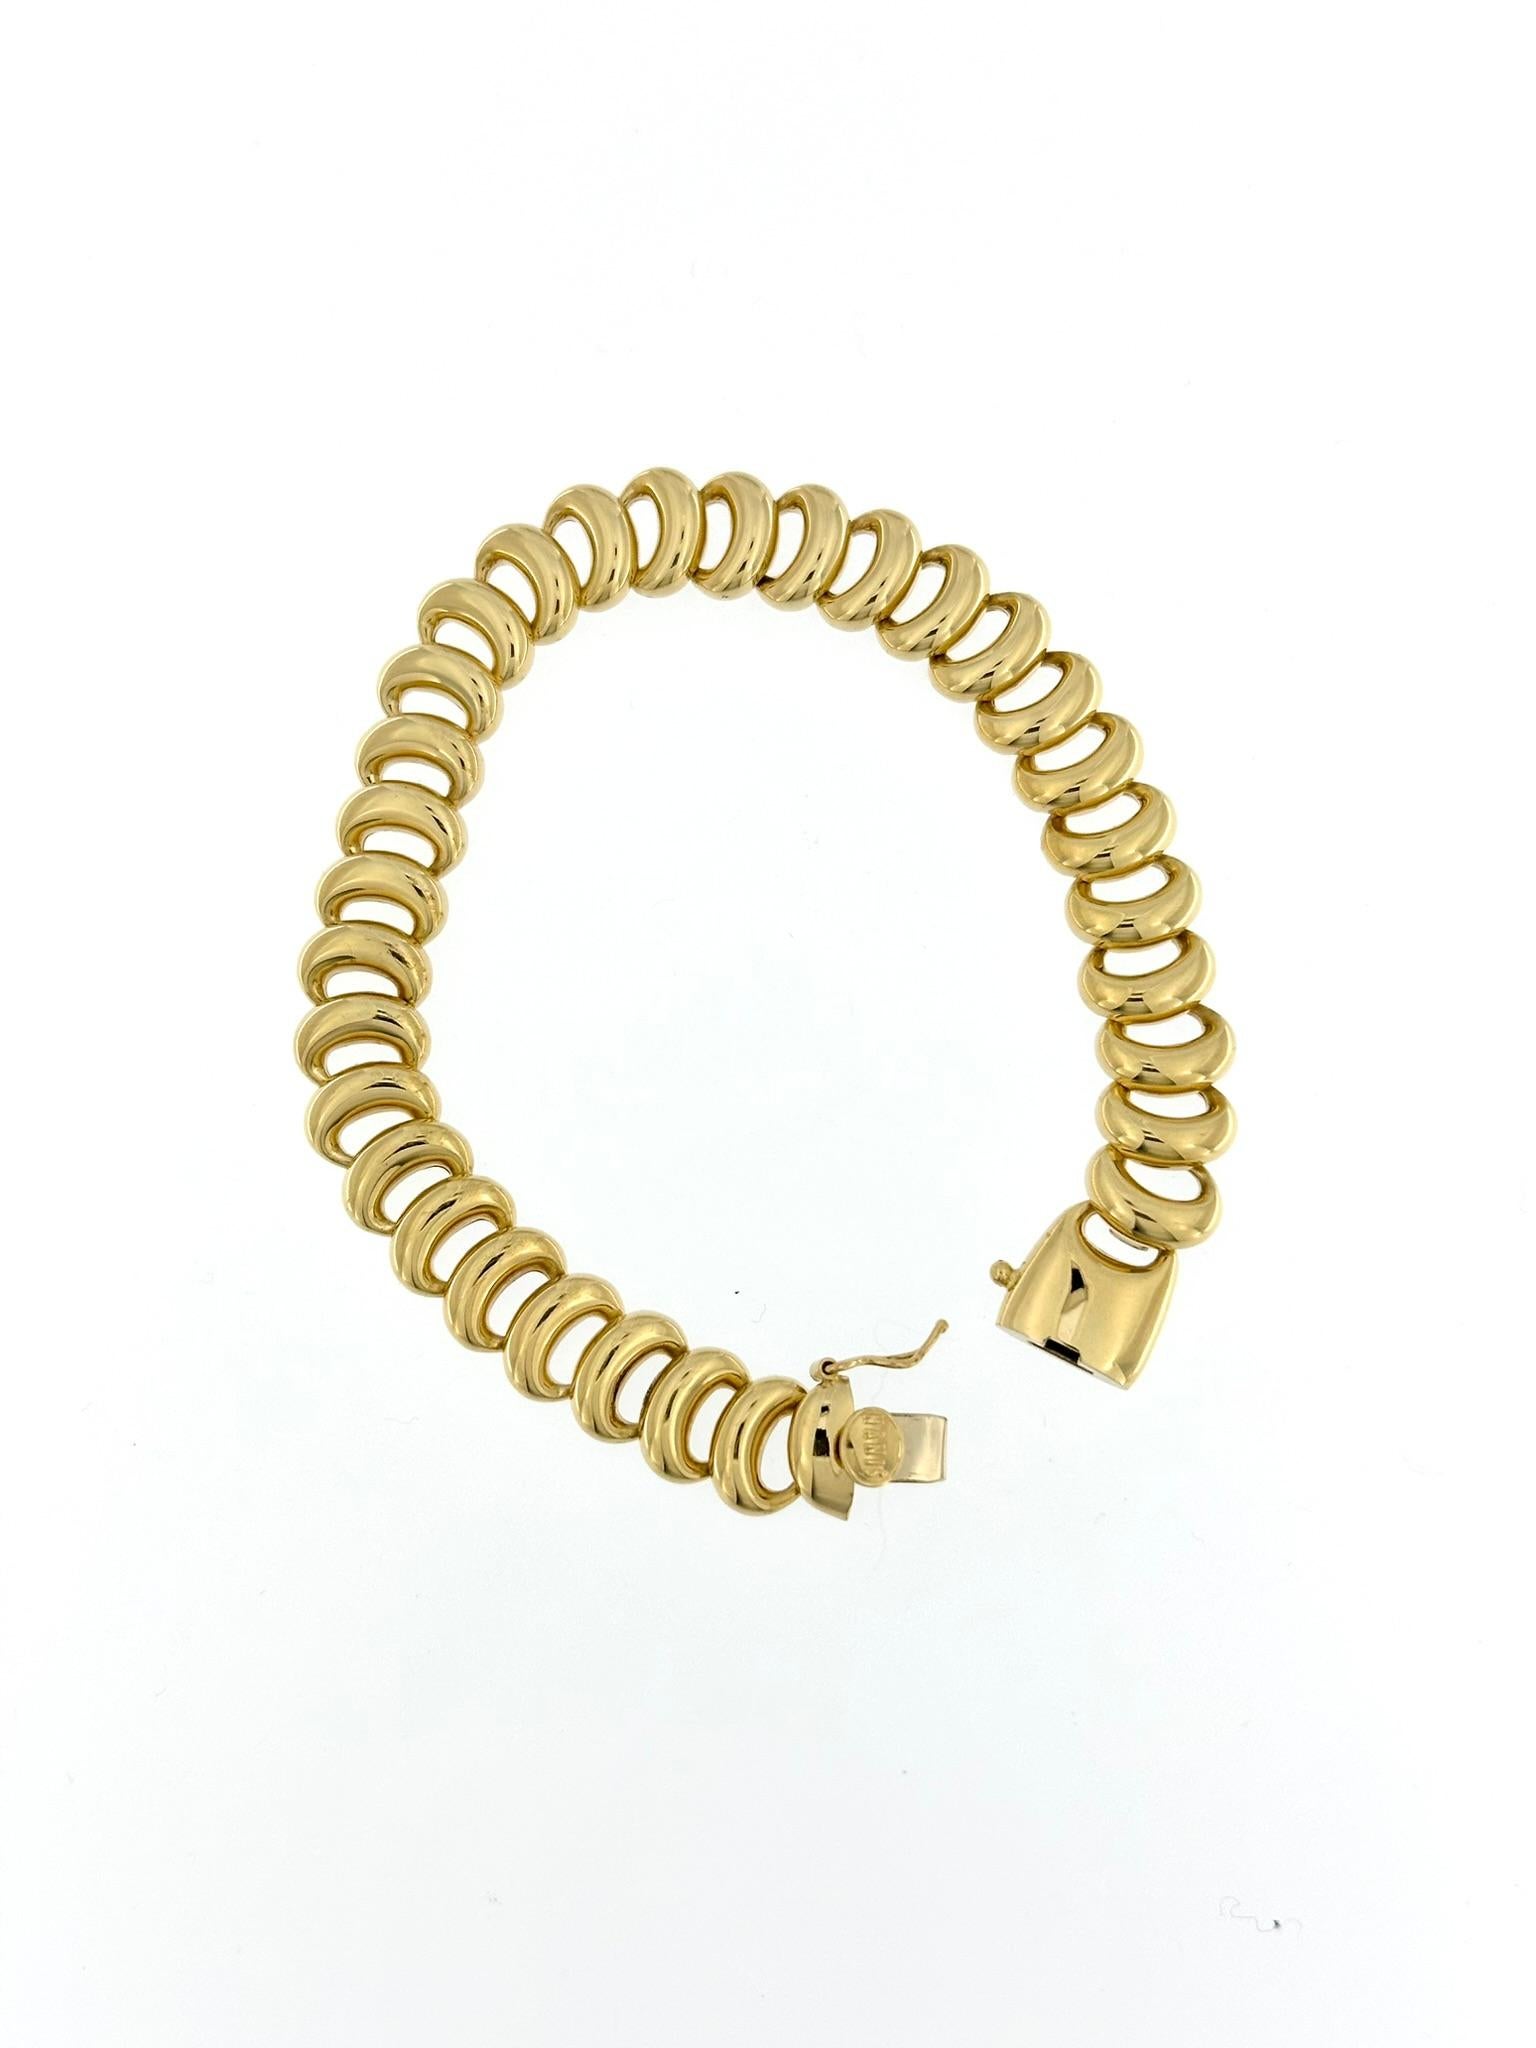 Contemporary Yellow Gold Flexible Bracelet signed by Nanis For Sale